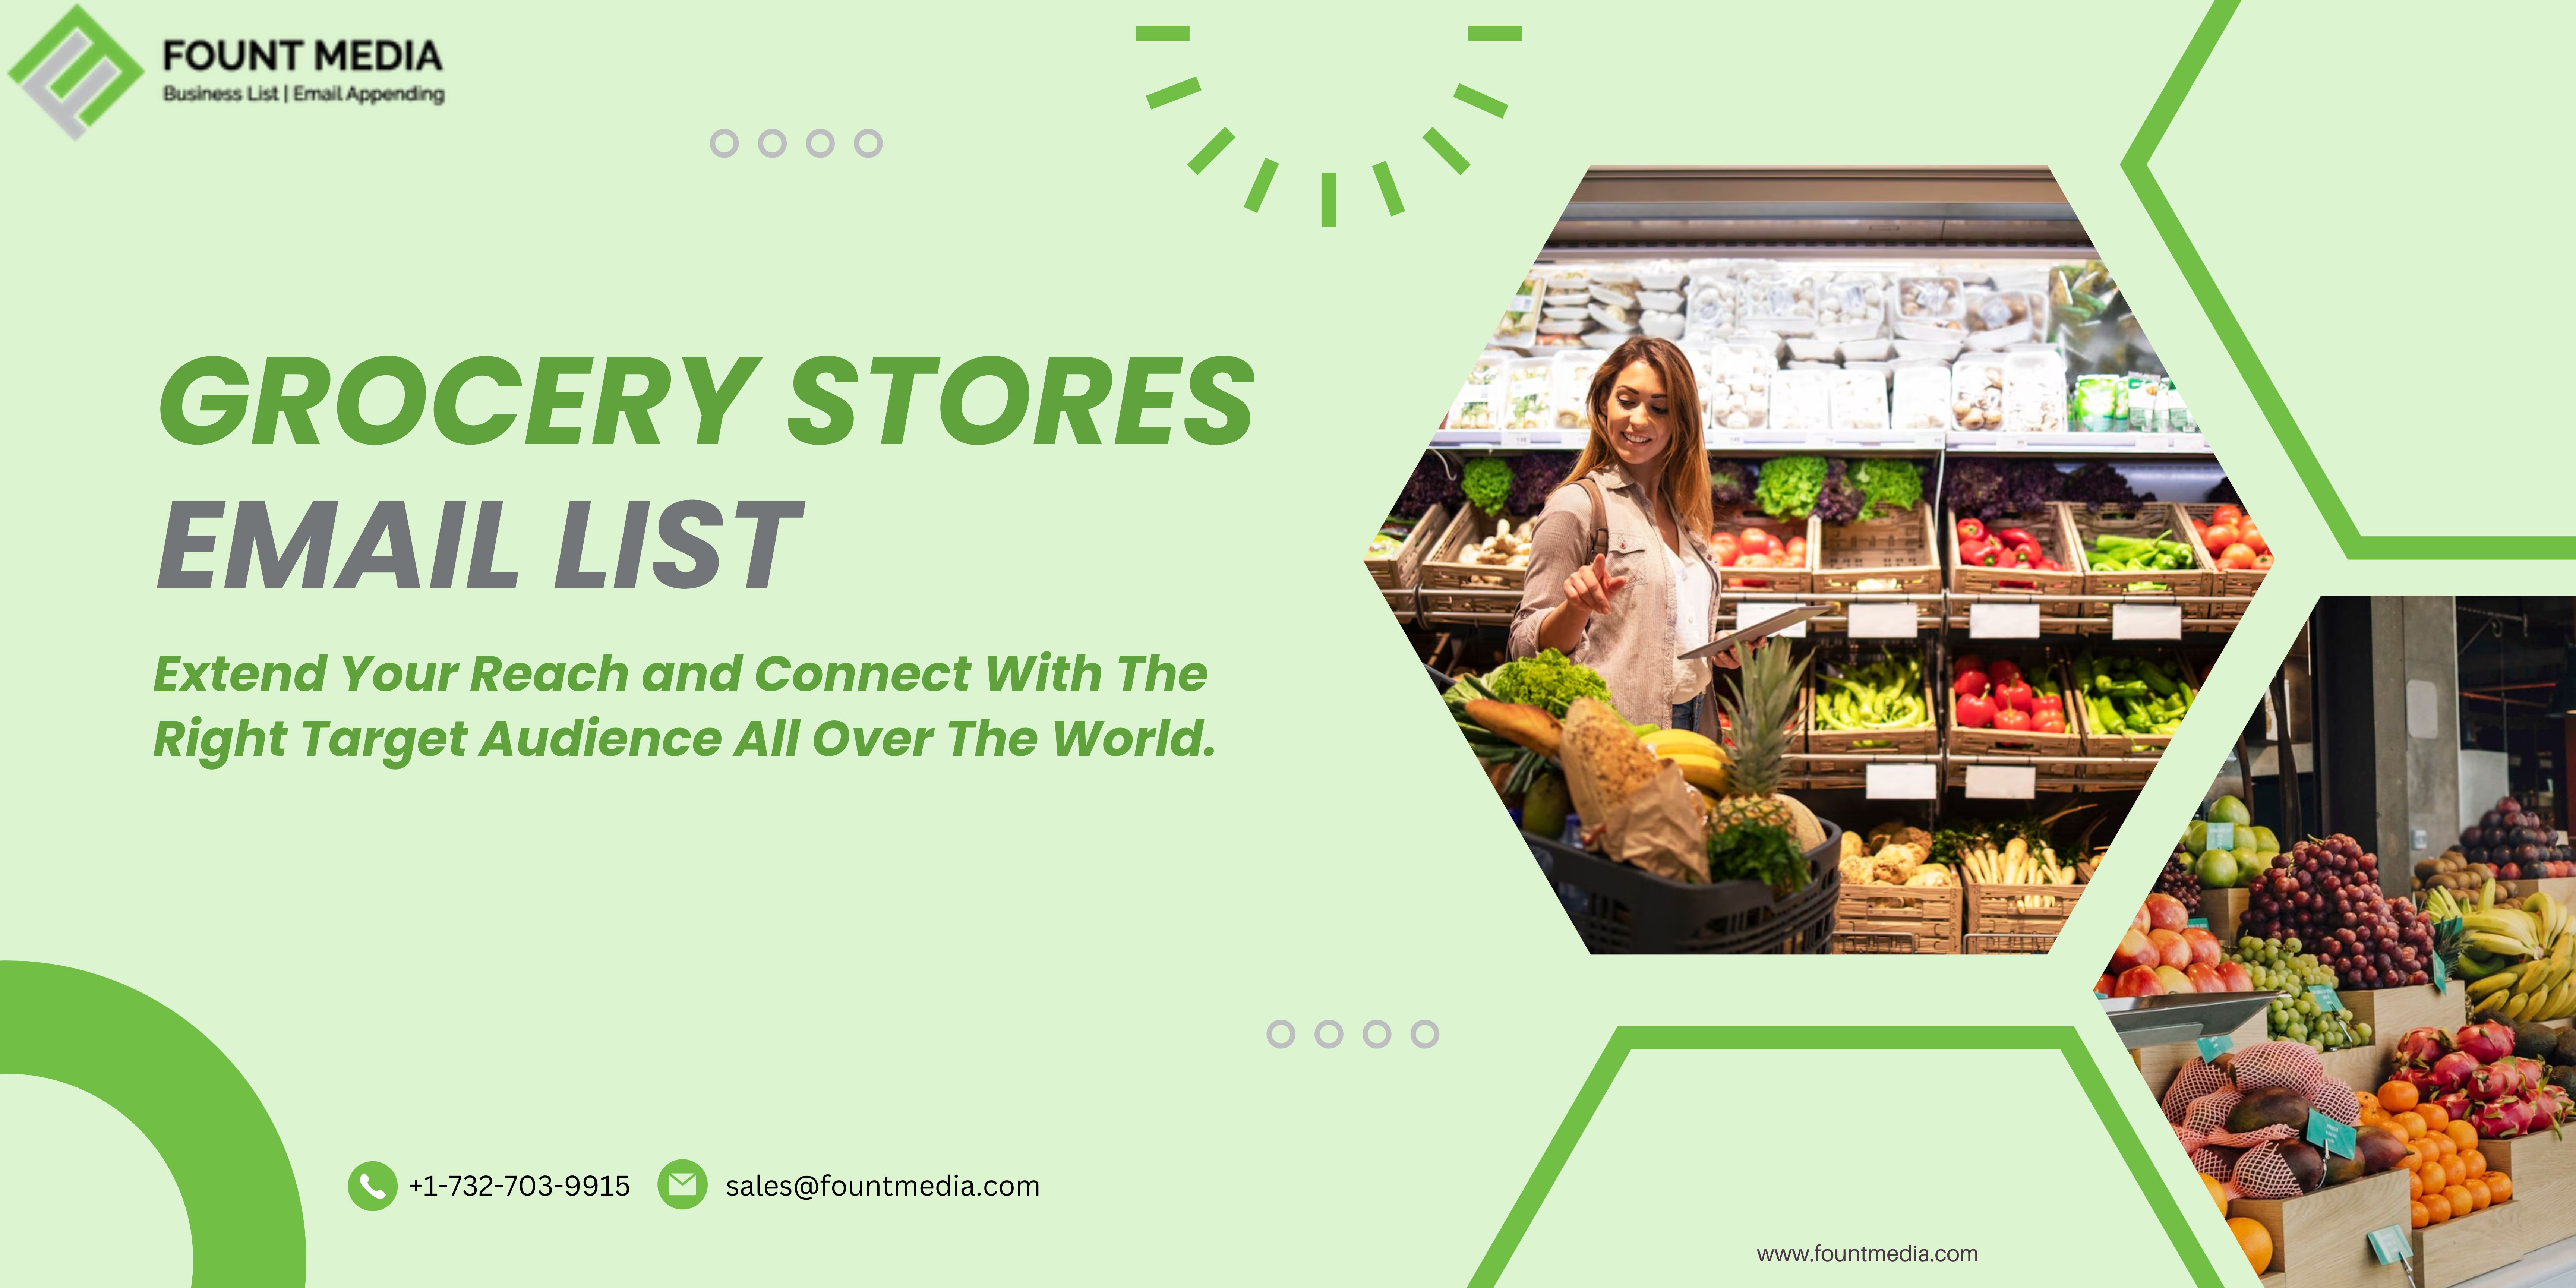 Grocery Stores Email List | Best Grocery Stores | Fountmedia